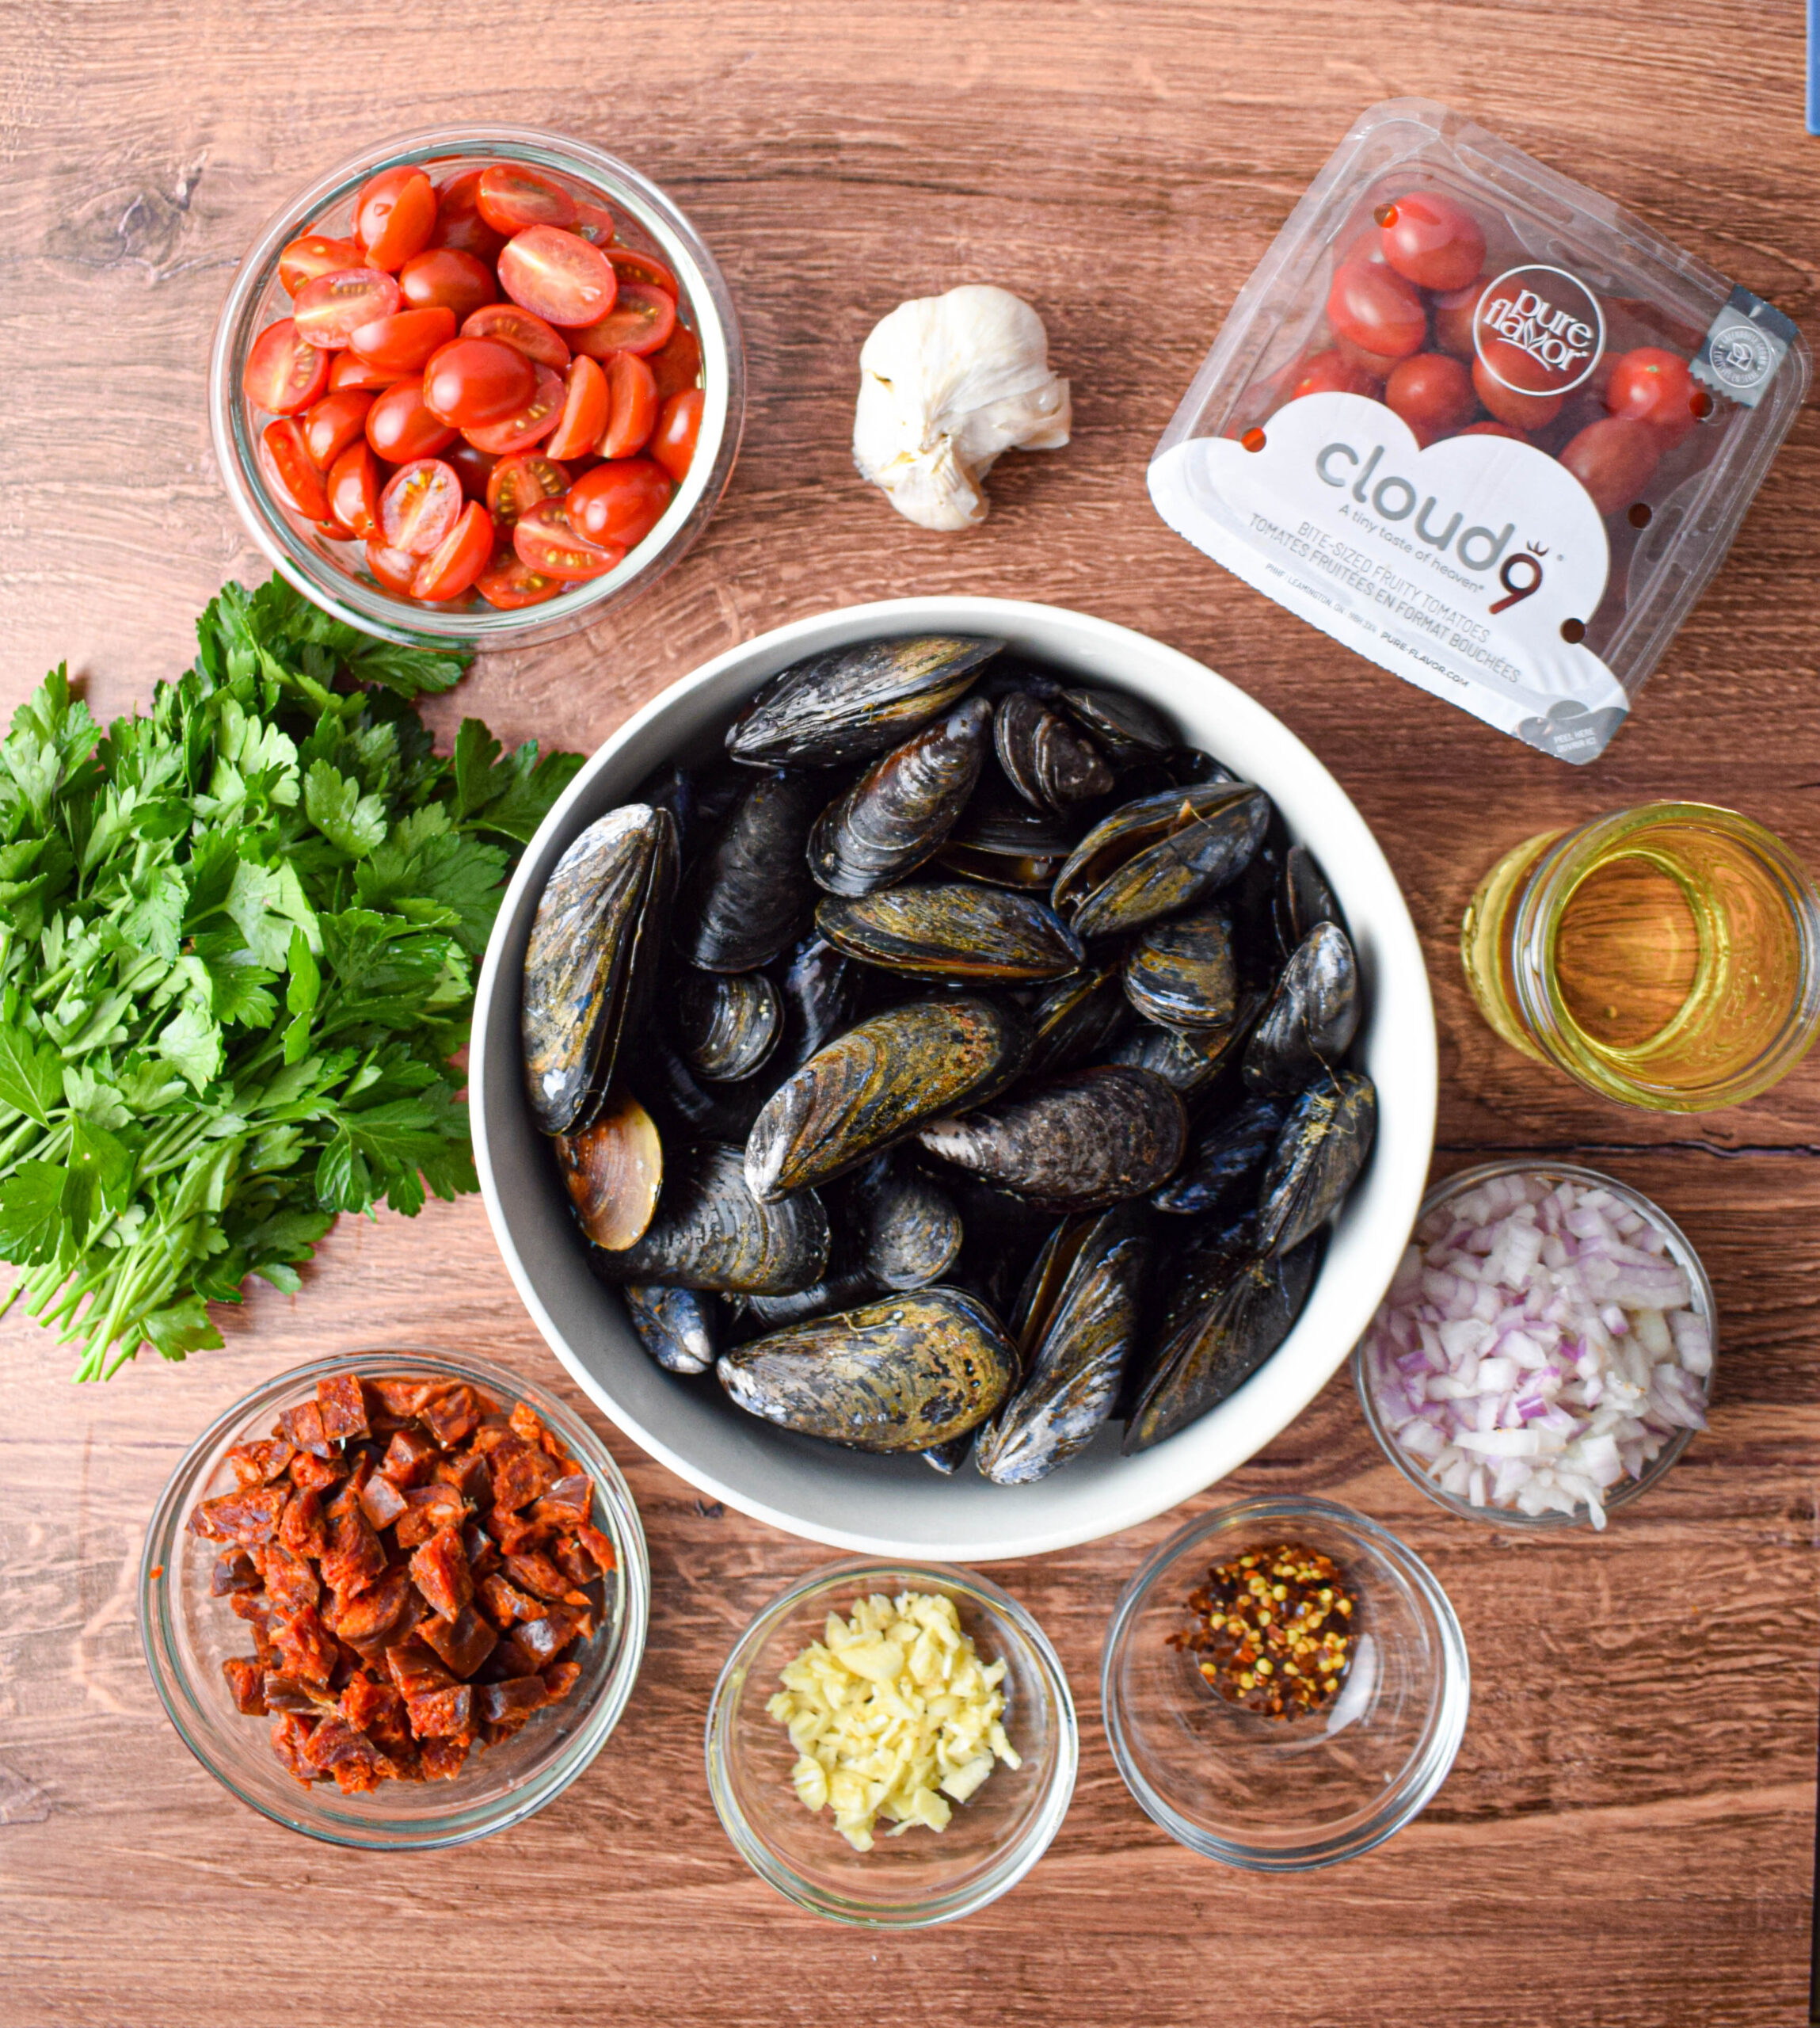 ingredients for chorizo and tomato steamed mussels. Bowl of halved tomatoes, garlic, fresh parsley, bowl of diced Spanish chorizo, bowl of diced shallot, glass of white wine, large bowl full of fresh mussels